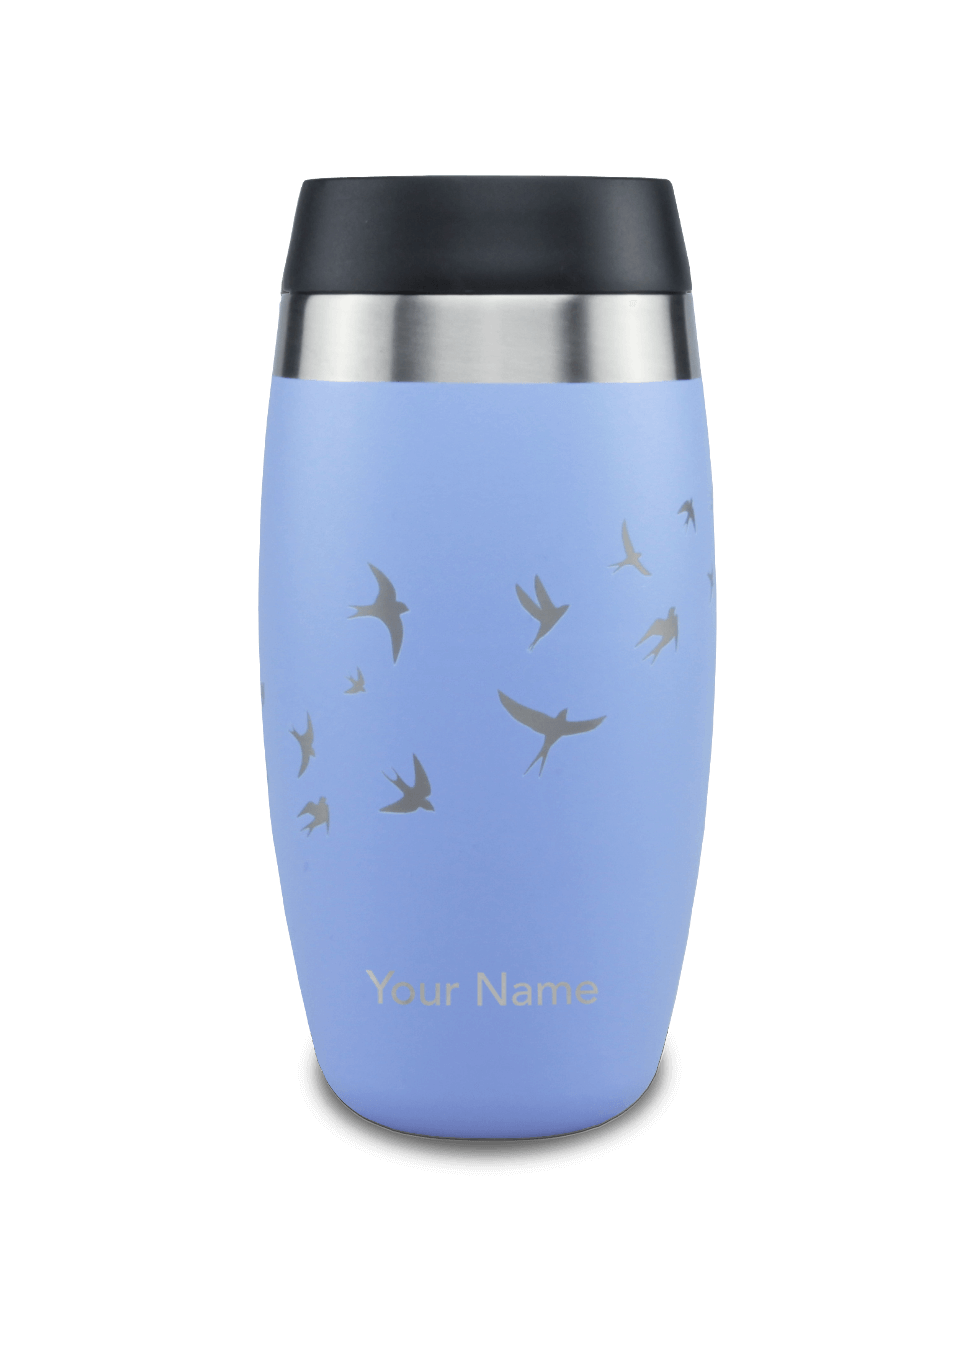 Personalised insulated travel mug in blue with bird design